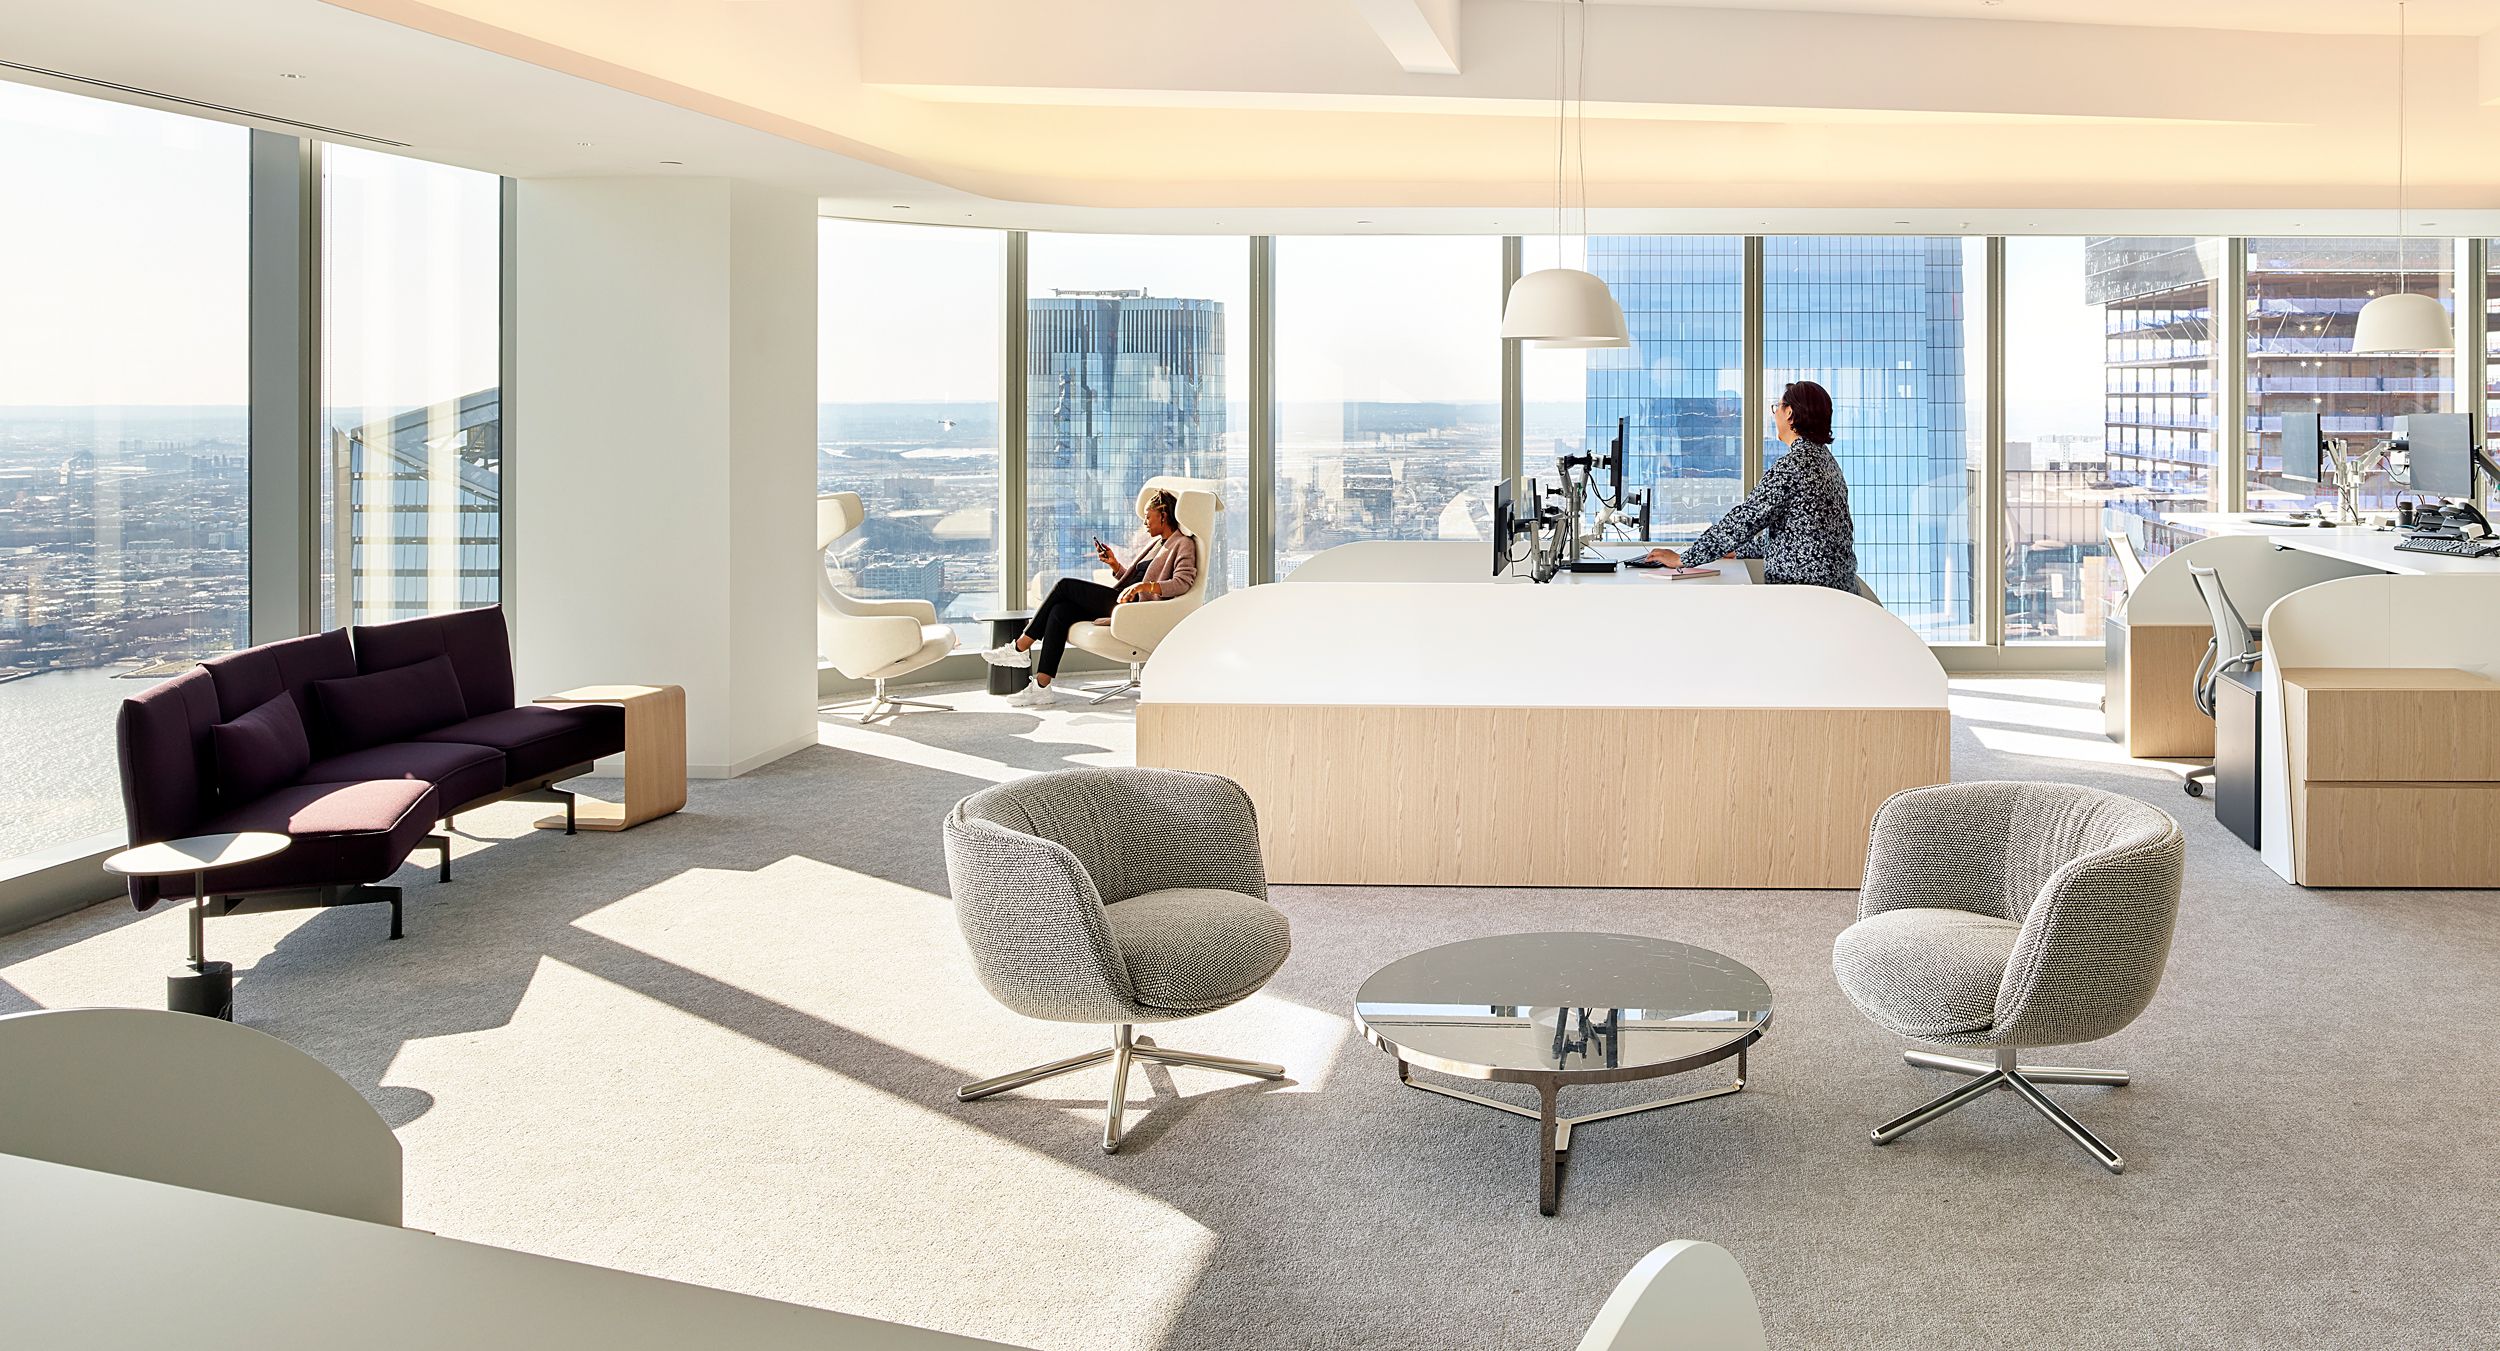 Premium materials, elegant lines, and thoughtful ergonomics redefine the open office experience.